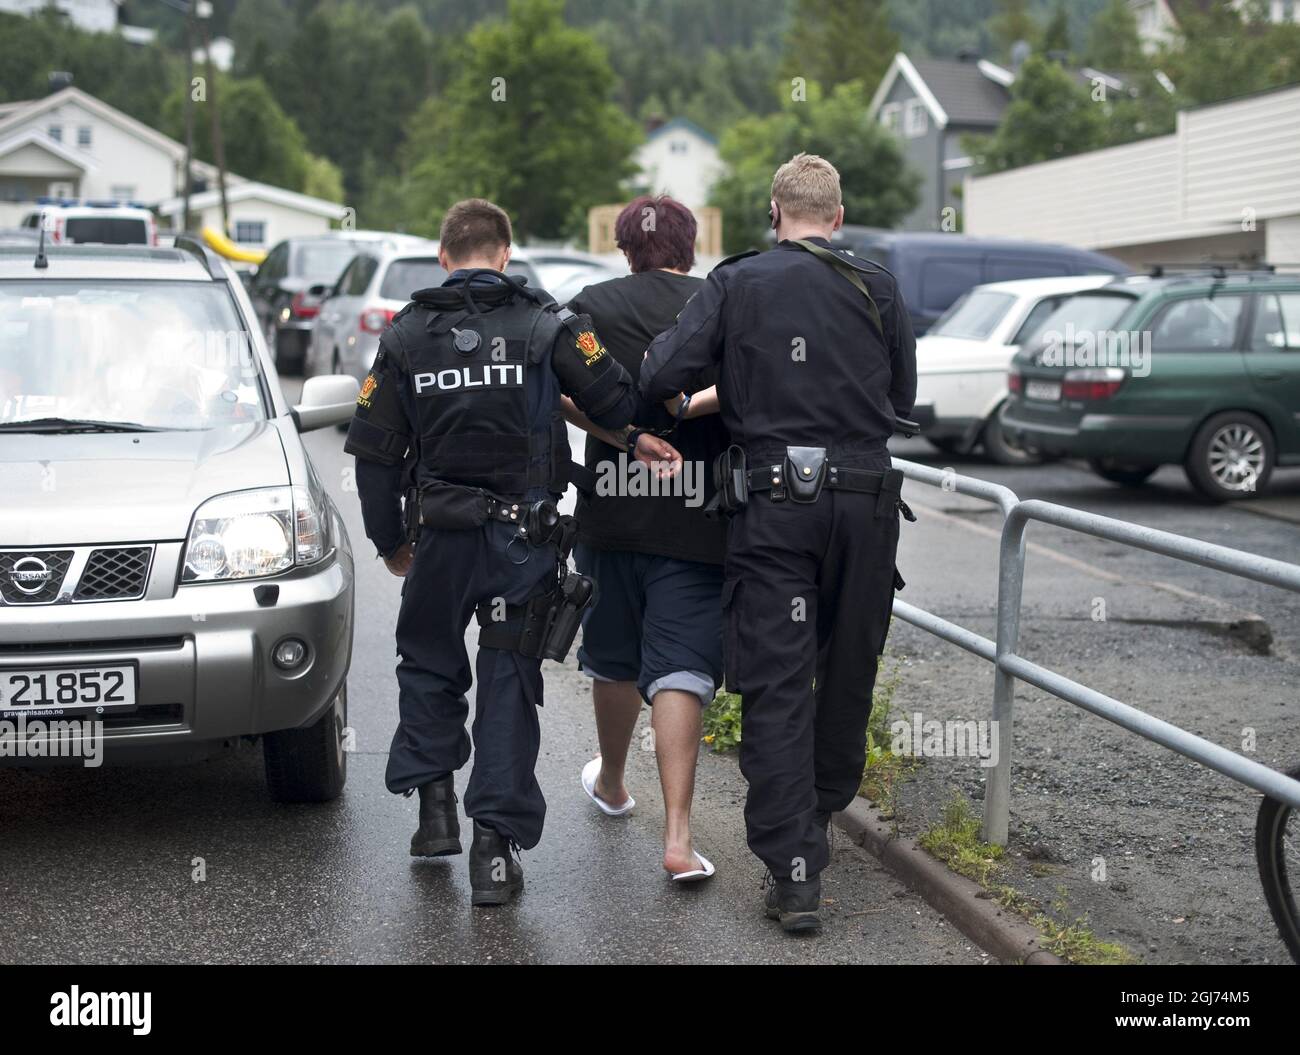 OSLO 20110723 Norwegian police detain a young man, center, accused of carrying a knife outside a hotel where Norway's prime minister was meeting families of shooting victims in Sundvollen, Norway Saturday July 23, 2011. The man told reporters he was a member of the Labor Party's youth wing and was carrying a knife 'because I feel unsafe.' FOTO BjÃ¶rn Larsson Rosvall / SCANPIX / Kod 9200 Stock Photo